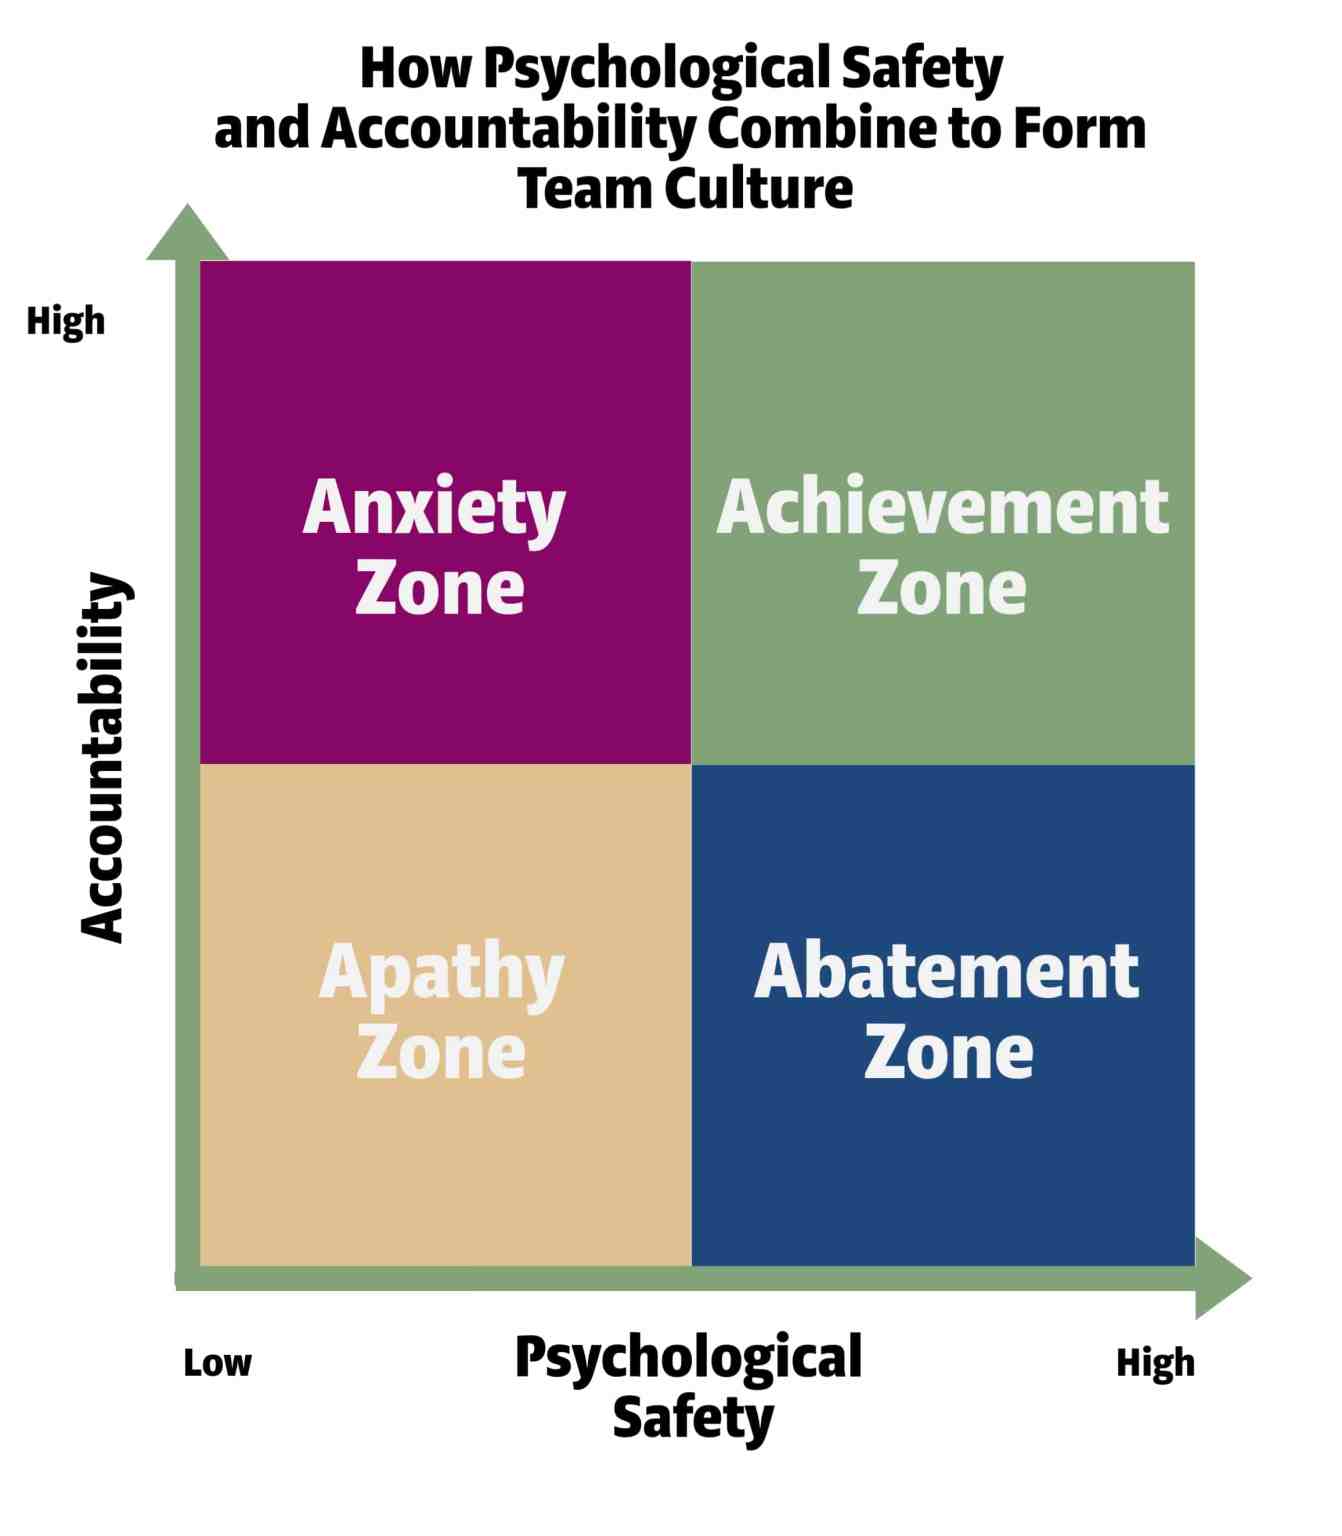 4 Steps to Move your Team (and stay) in the Achievement Zone